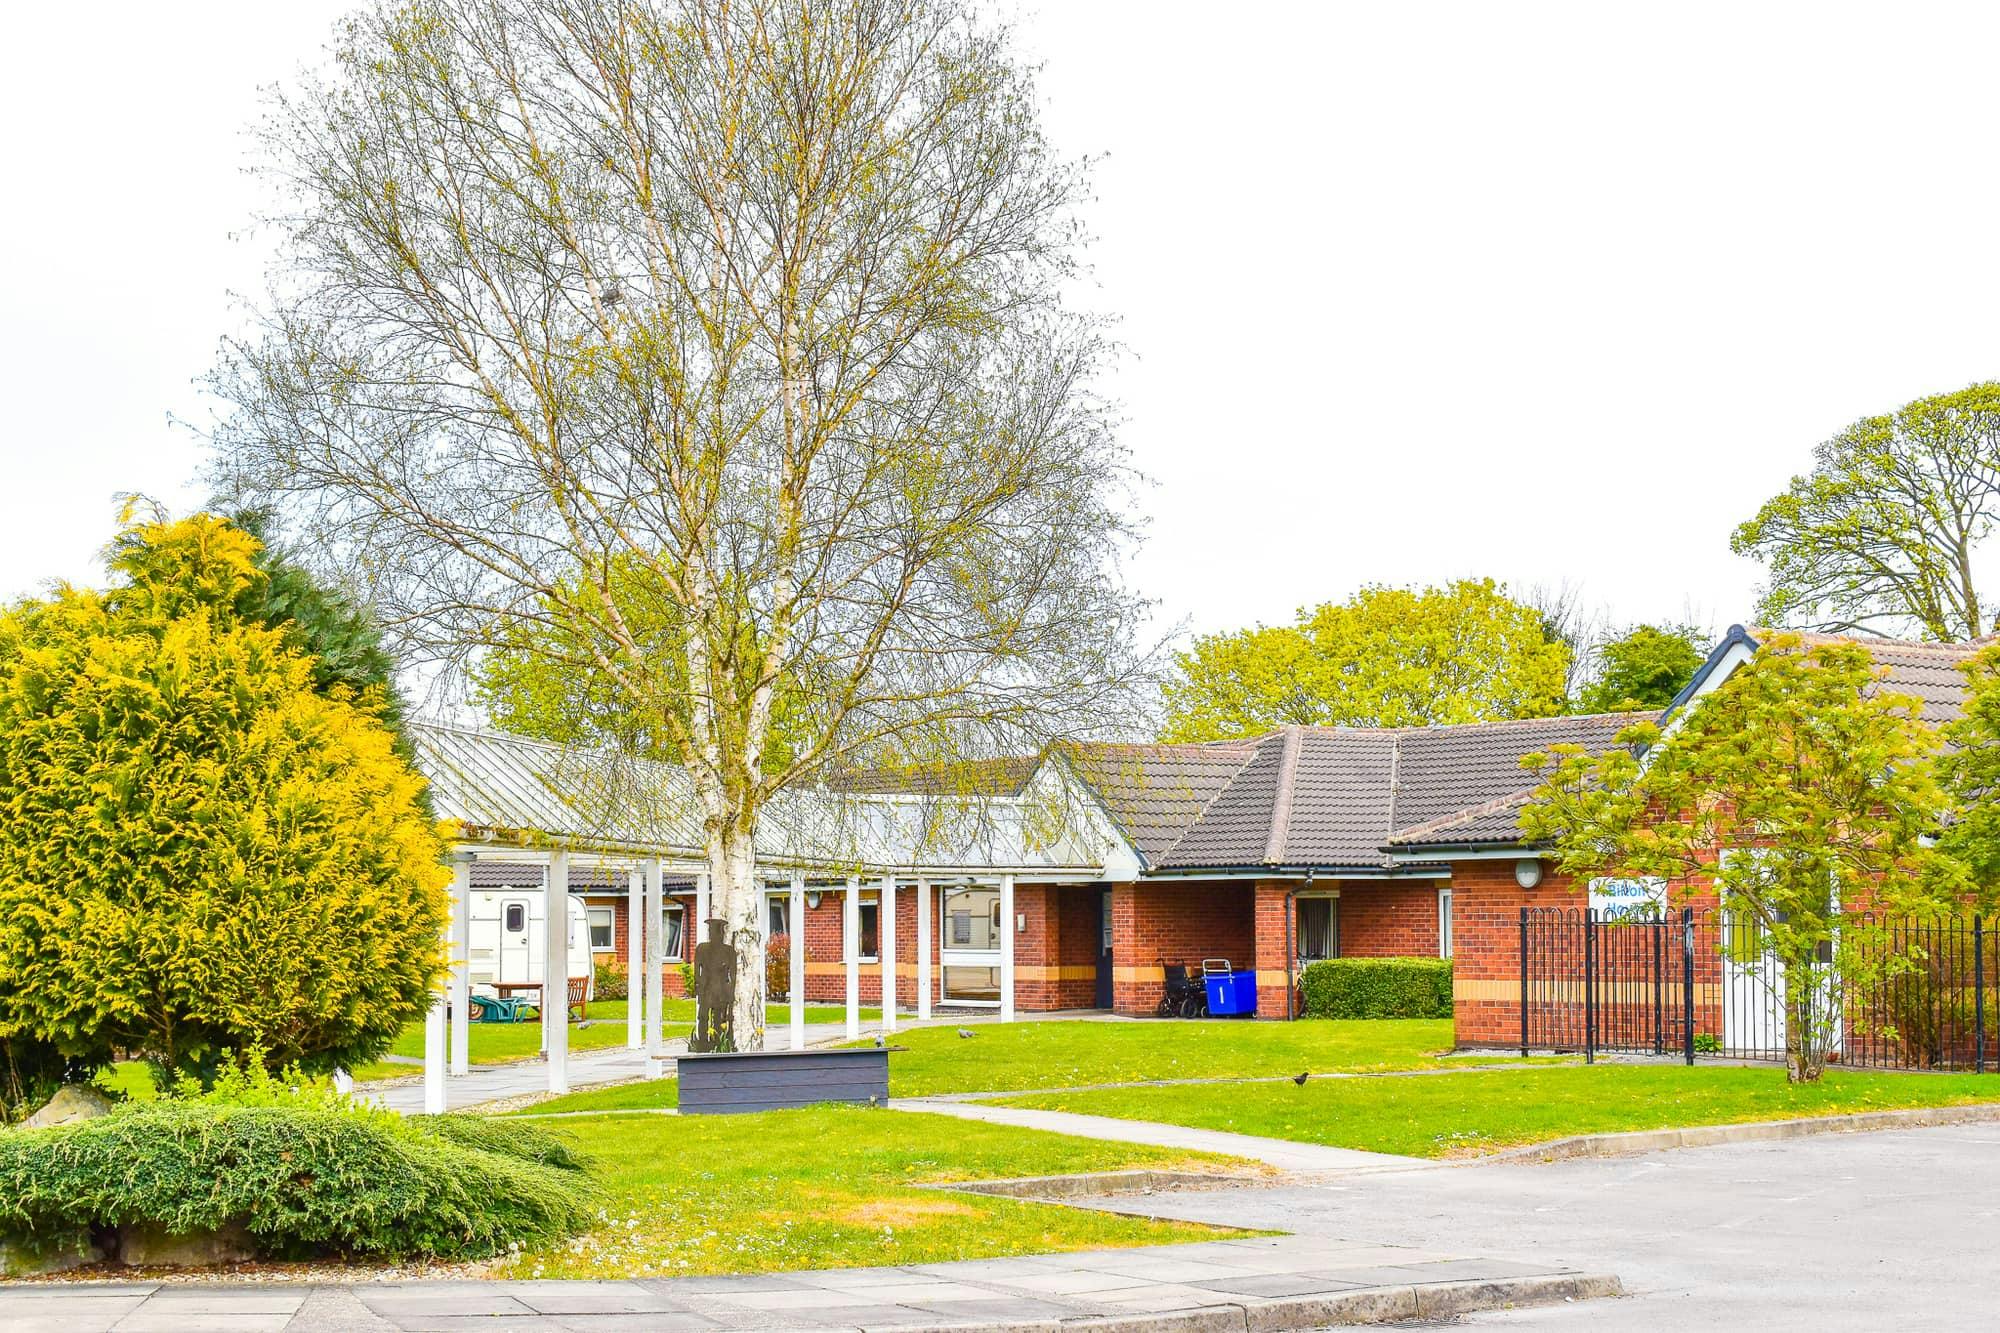 Exterior at Saltshouse Have Care Home, Hull 